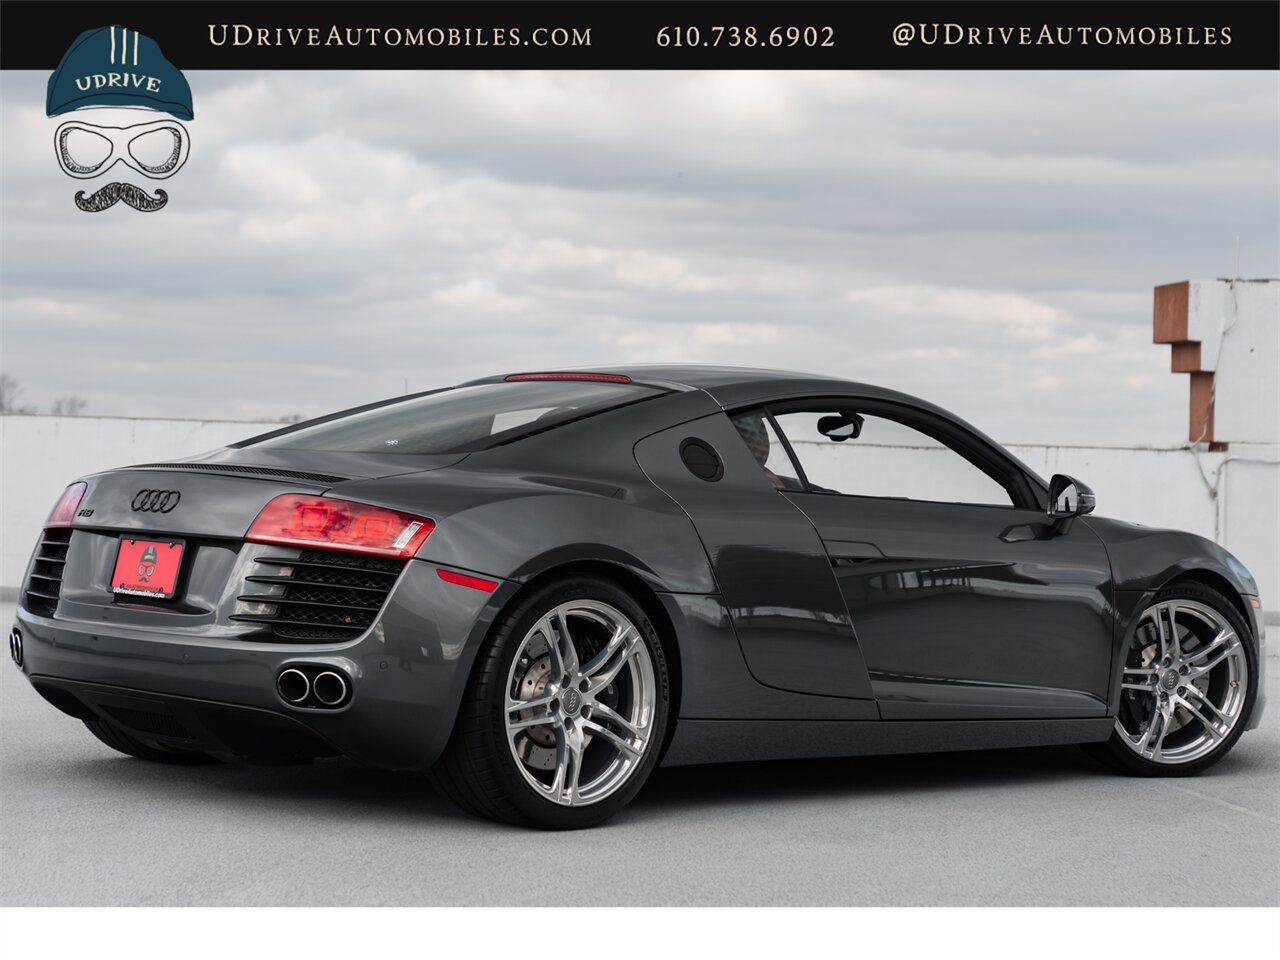 2009 Audi R8 Quattro  4.2 V8 6 Speed Manual 15k Miles - Photo 4 - West Chester, PA 19382